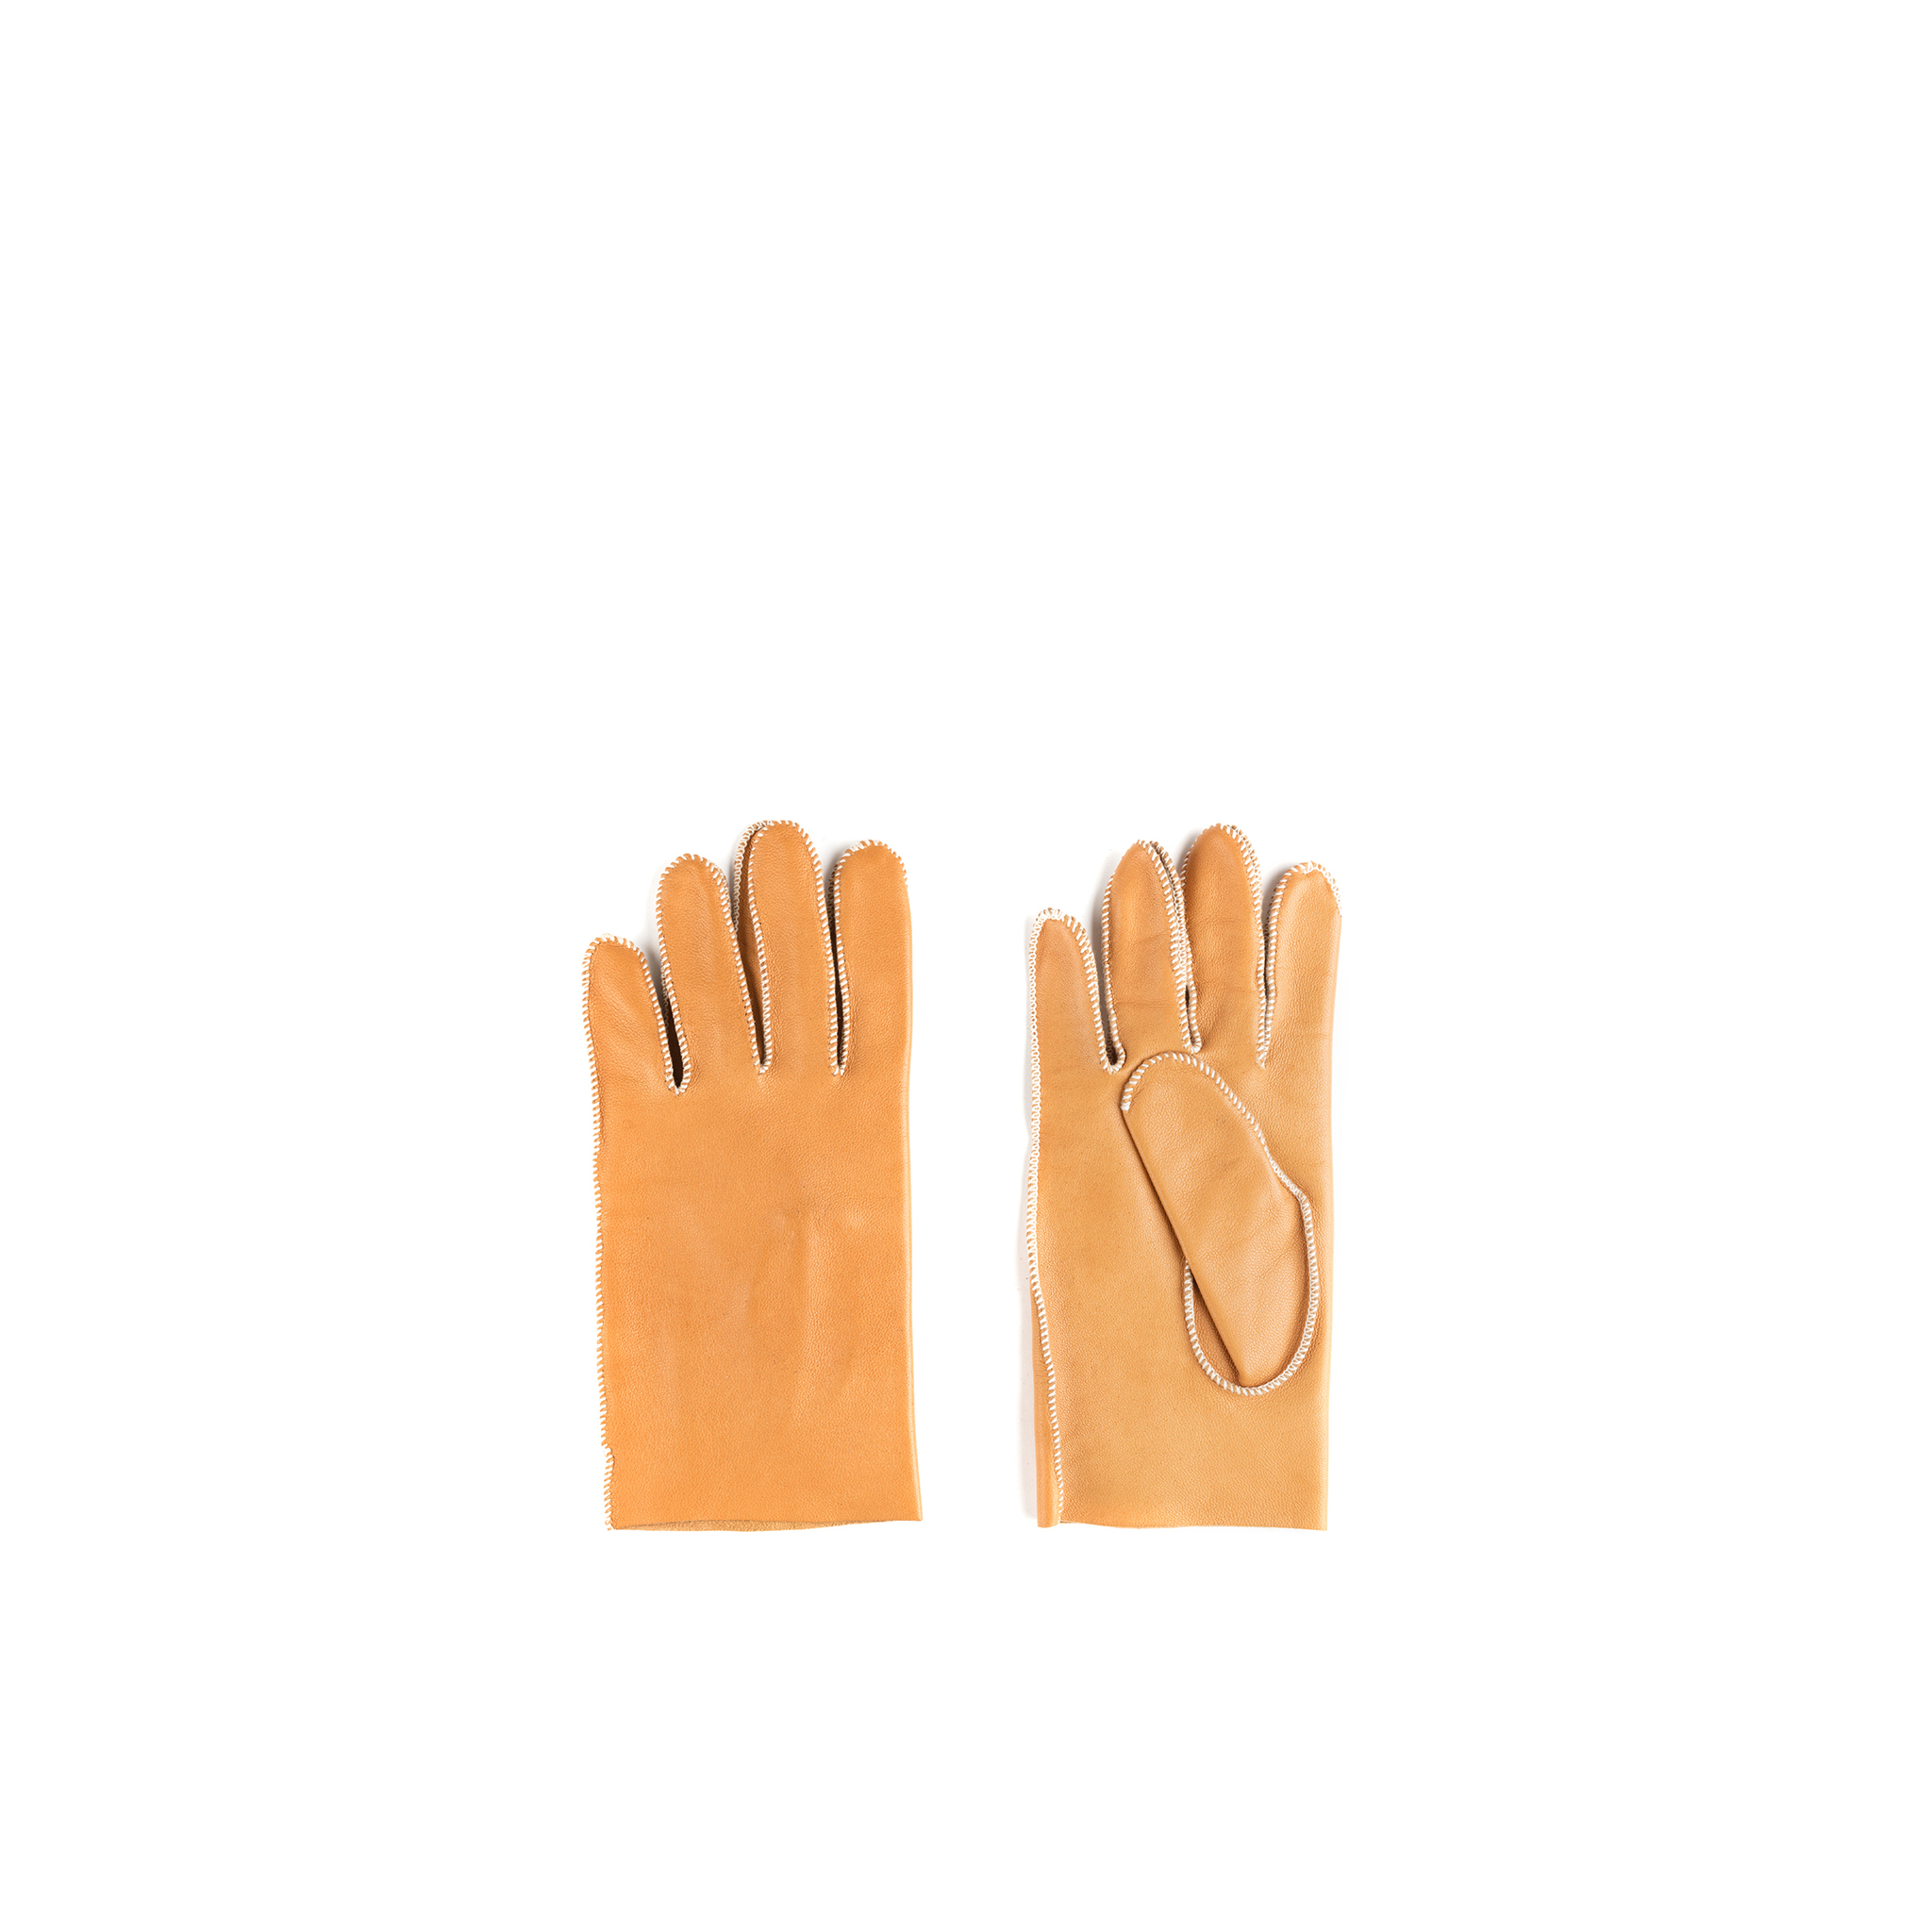 Gloves N°1 - Lamb leather - Tan color